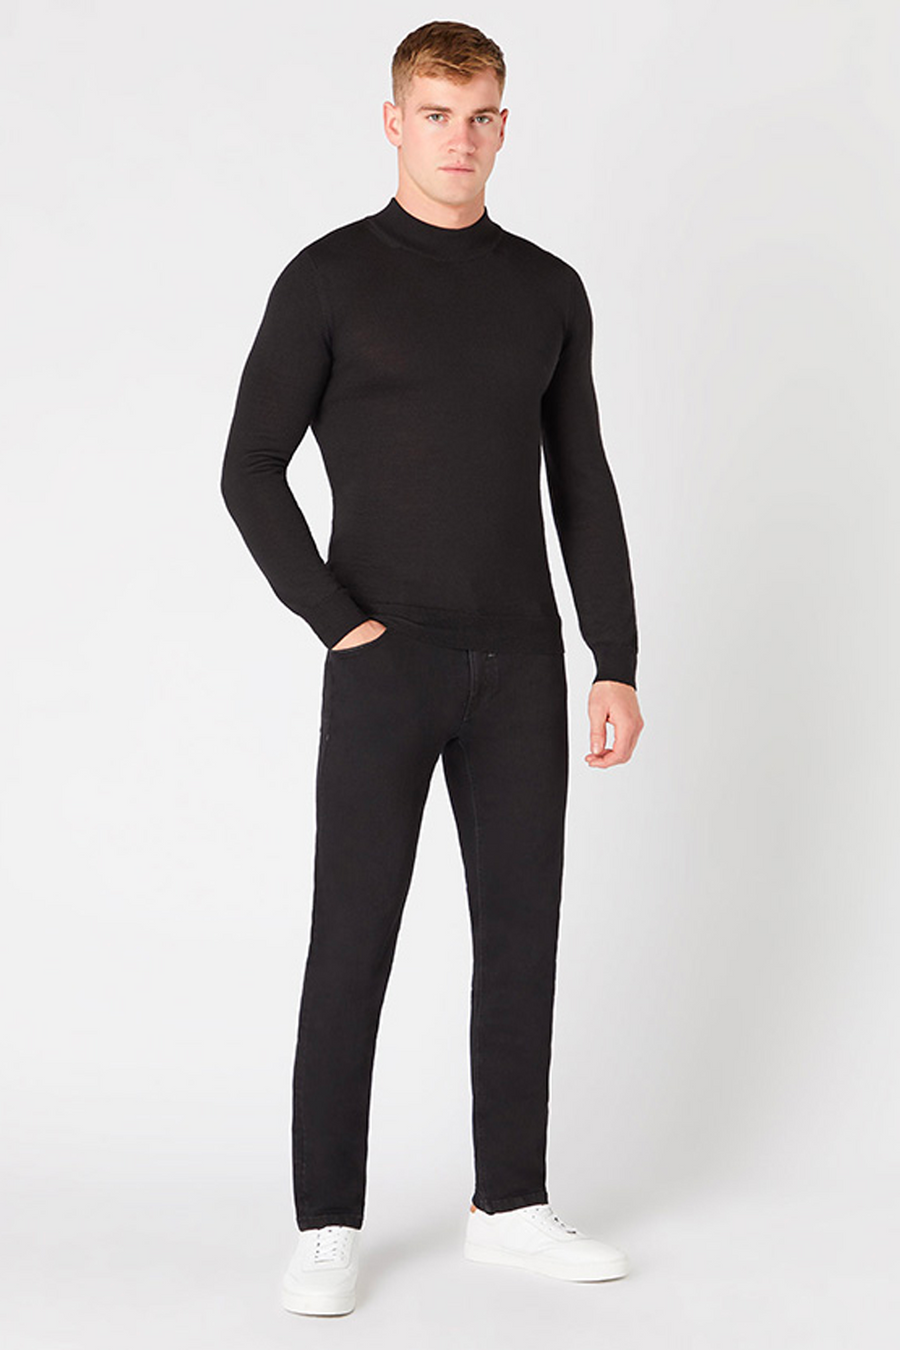 Buy the Remus Uomo L/S Turtle Neck Knitwear Black at Intro. Spend £50 for free UK delivery. Official stockists. We ship worldwide.